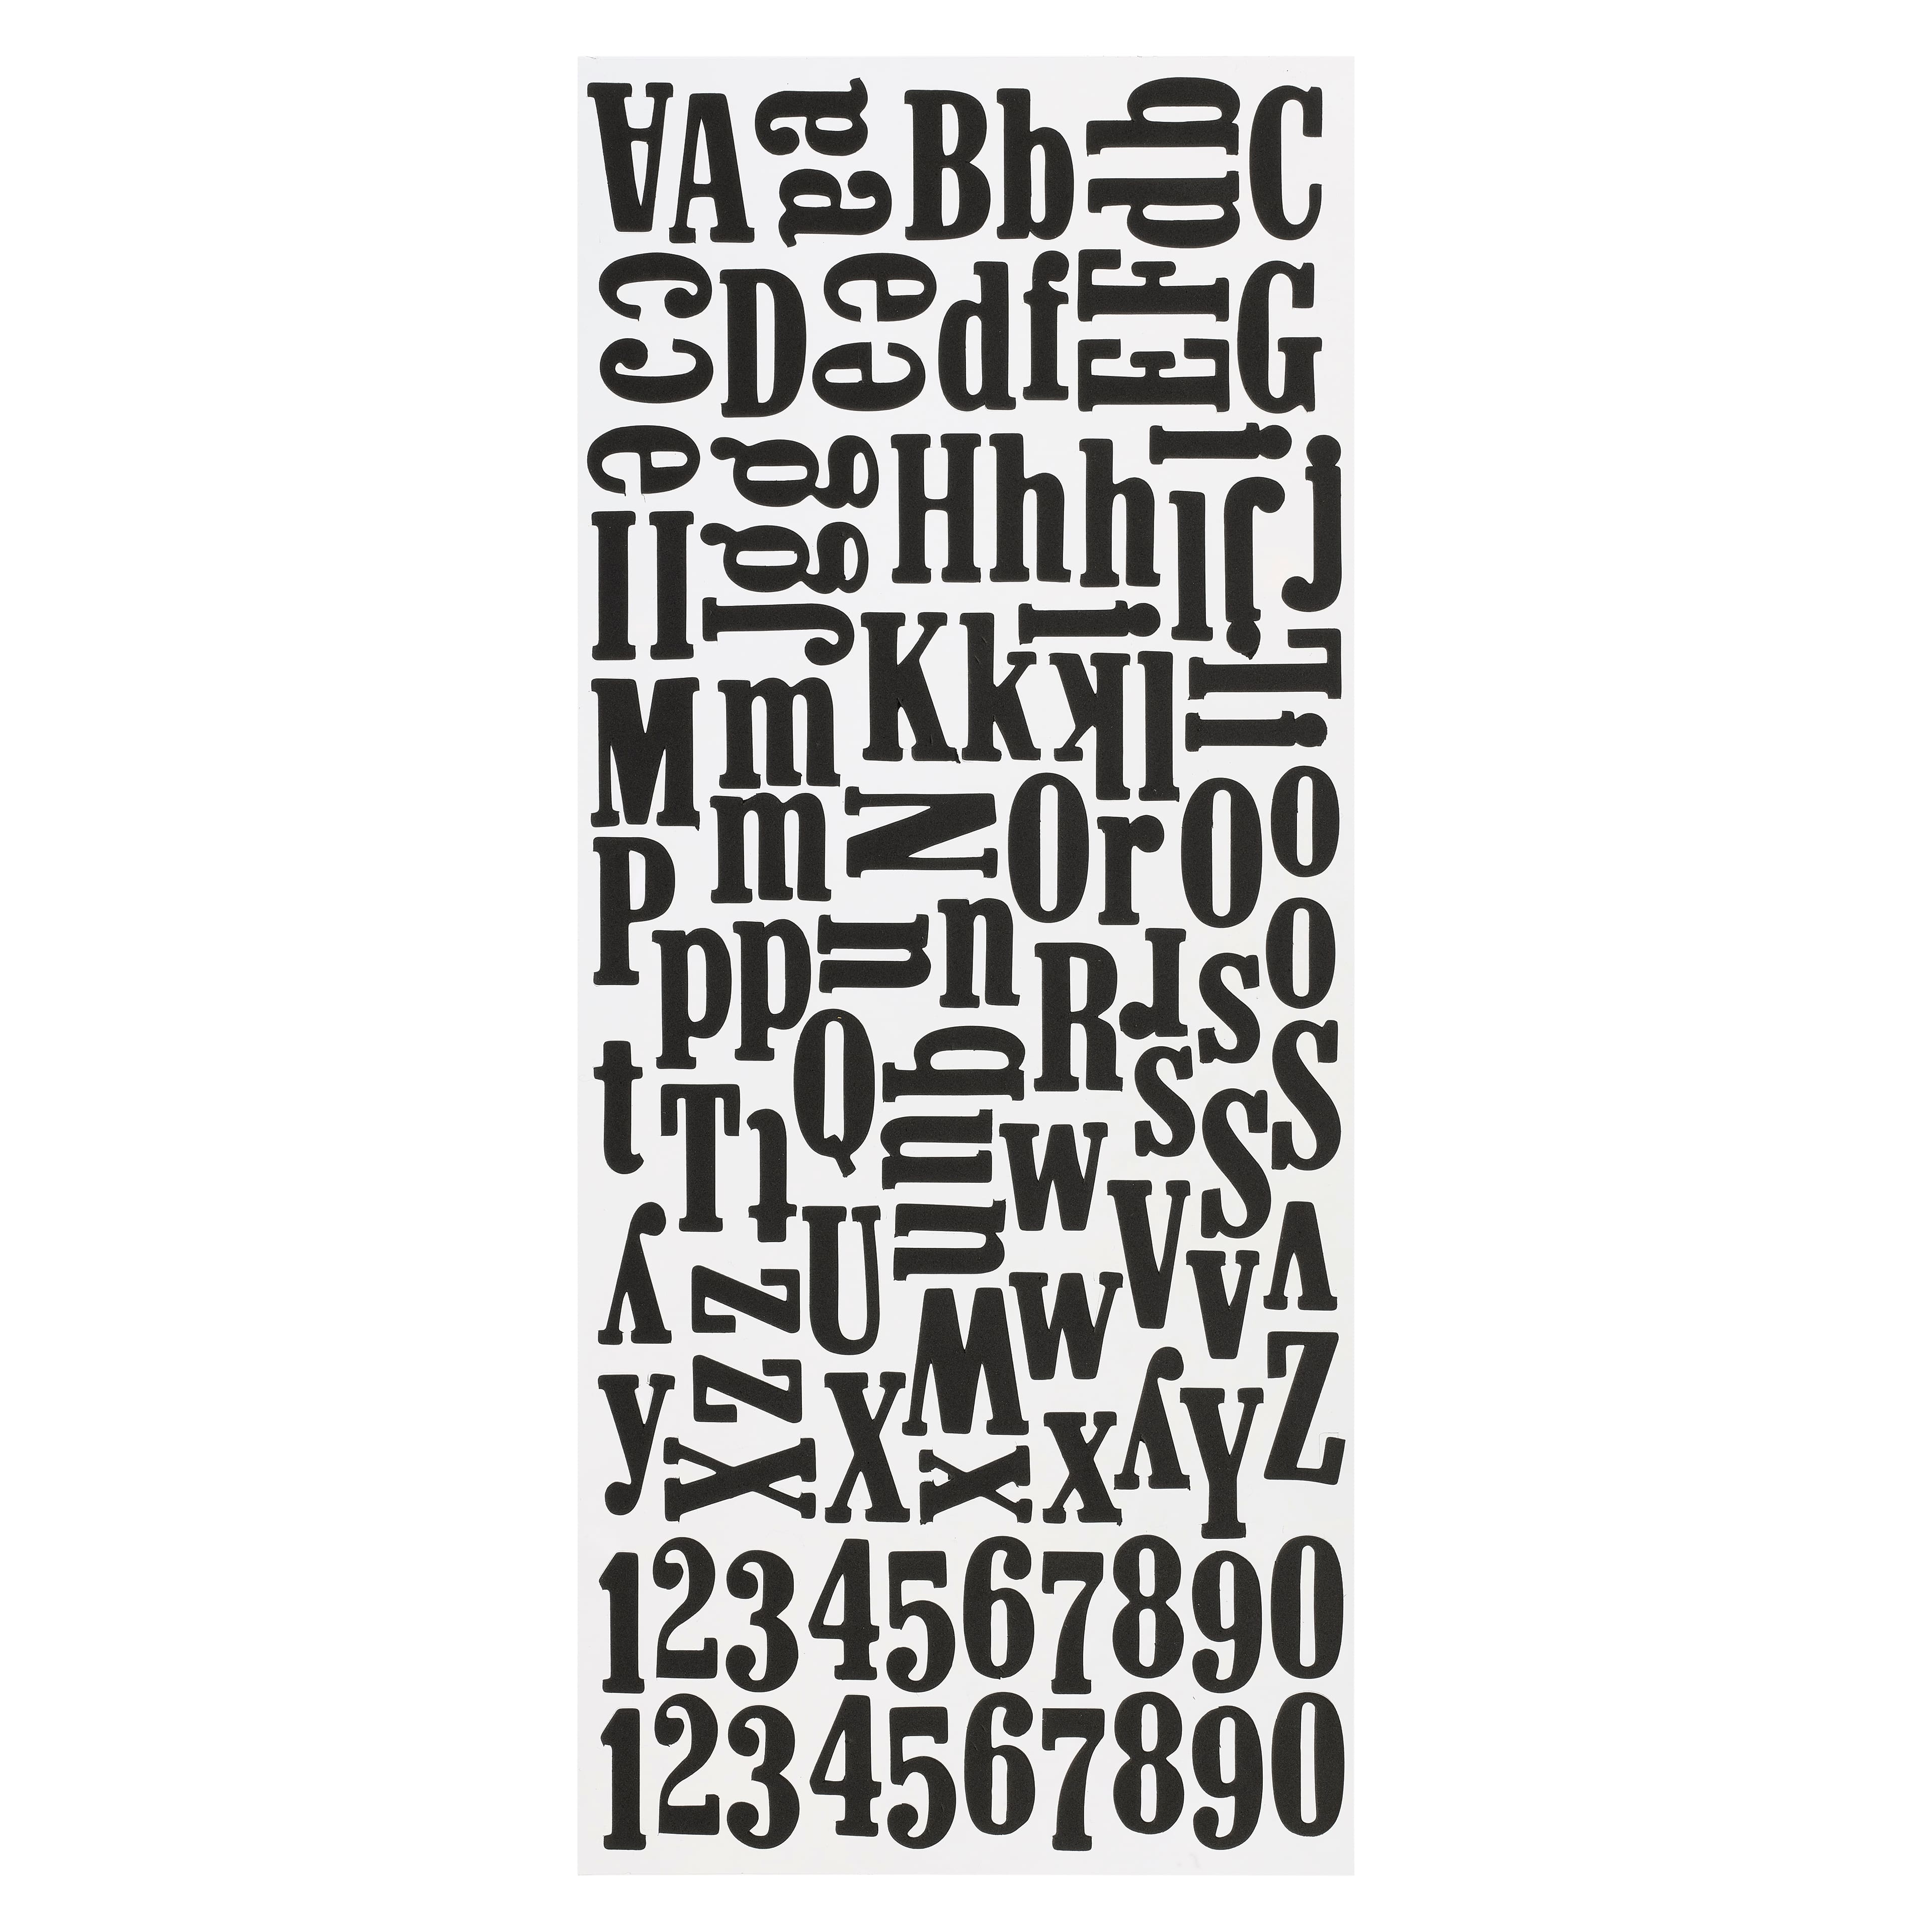 12 Packs: 104 ct. (1,248 total) Large White Alphabet Foam Stickers by  Recollections™